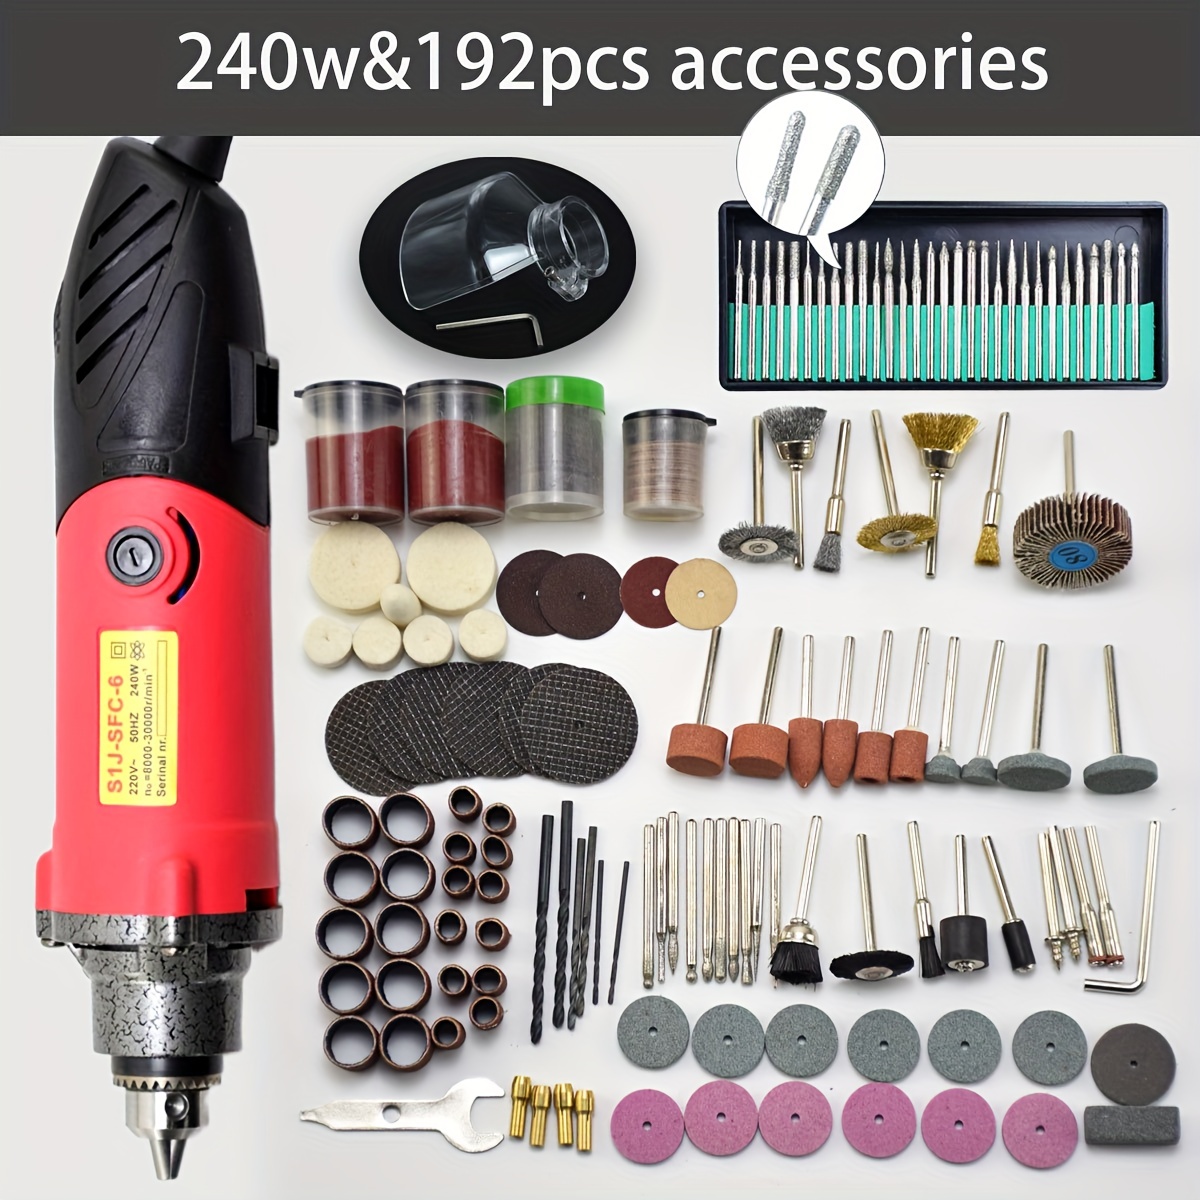 480Pcs Rotary Tool Accessories Kit, GOXAWEE 1/8 inch Shank Rotary Tool  Accessory Set, Multi Purpose Universal Kit for Cutting, Drilling, Grinding,  Polishing, Engraving & Sanding 